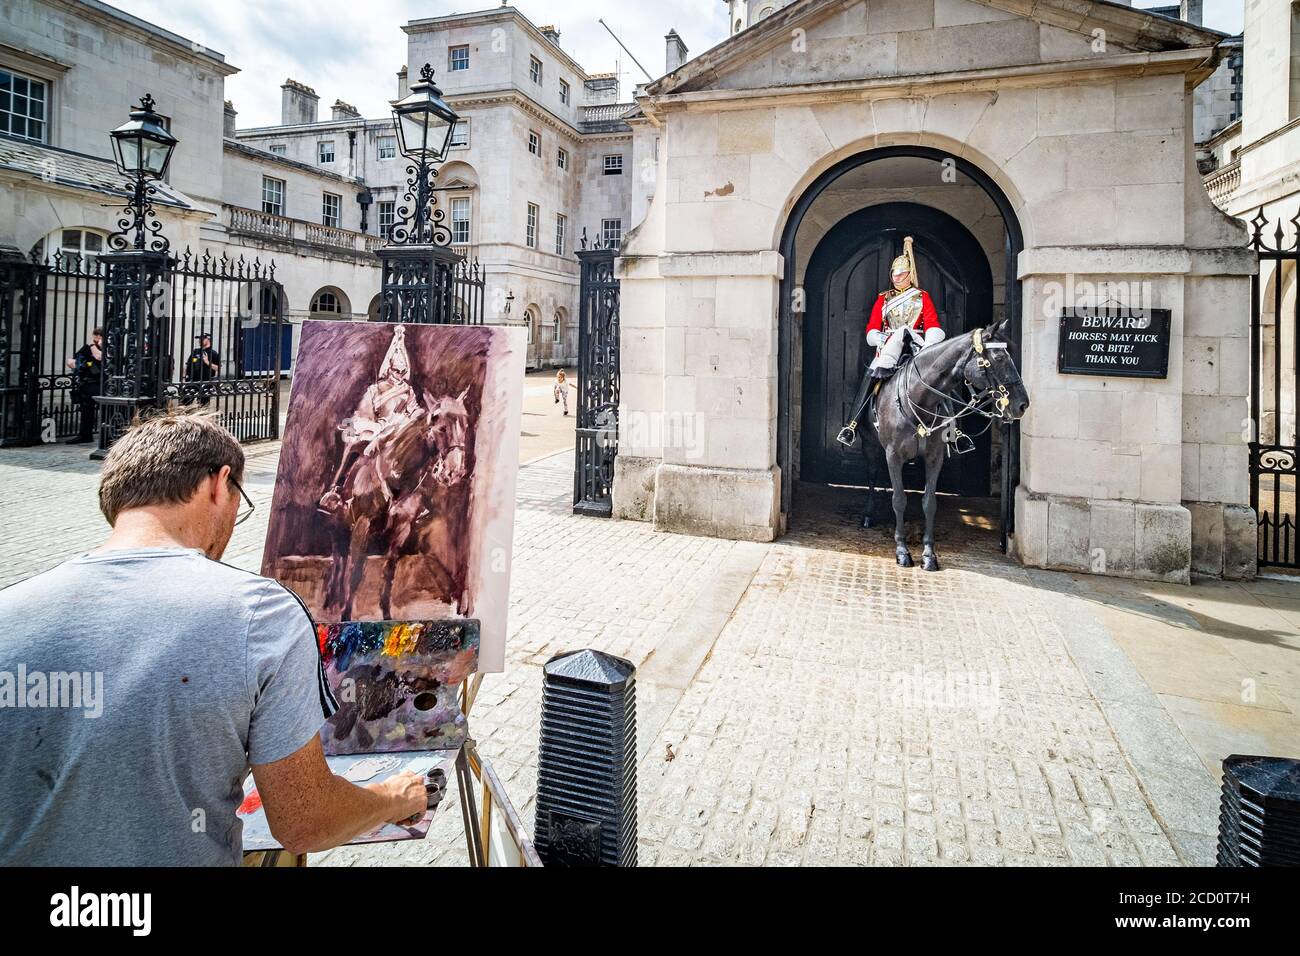 London- A man painting a scene at the Horse Guard Barracks, a popular tourist attraction in Whitehall, London. Stock Photo